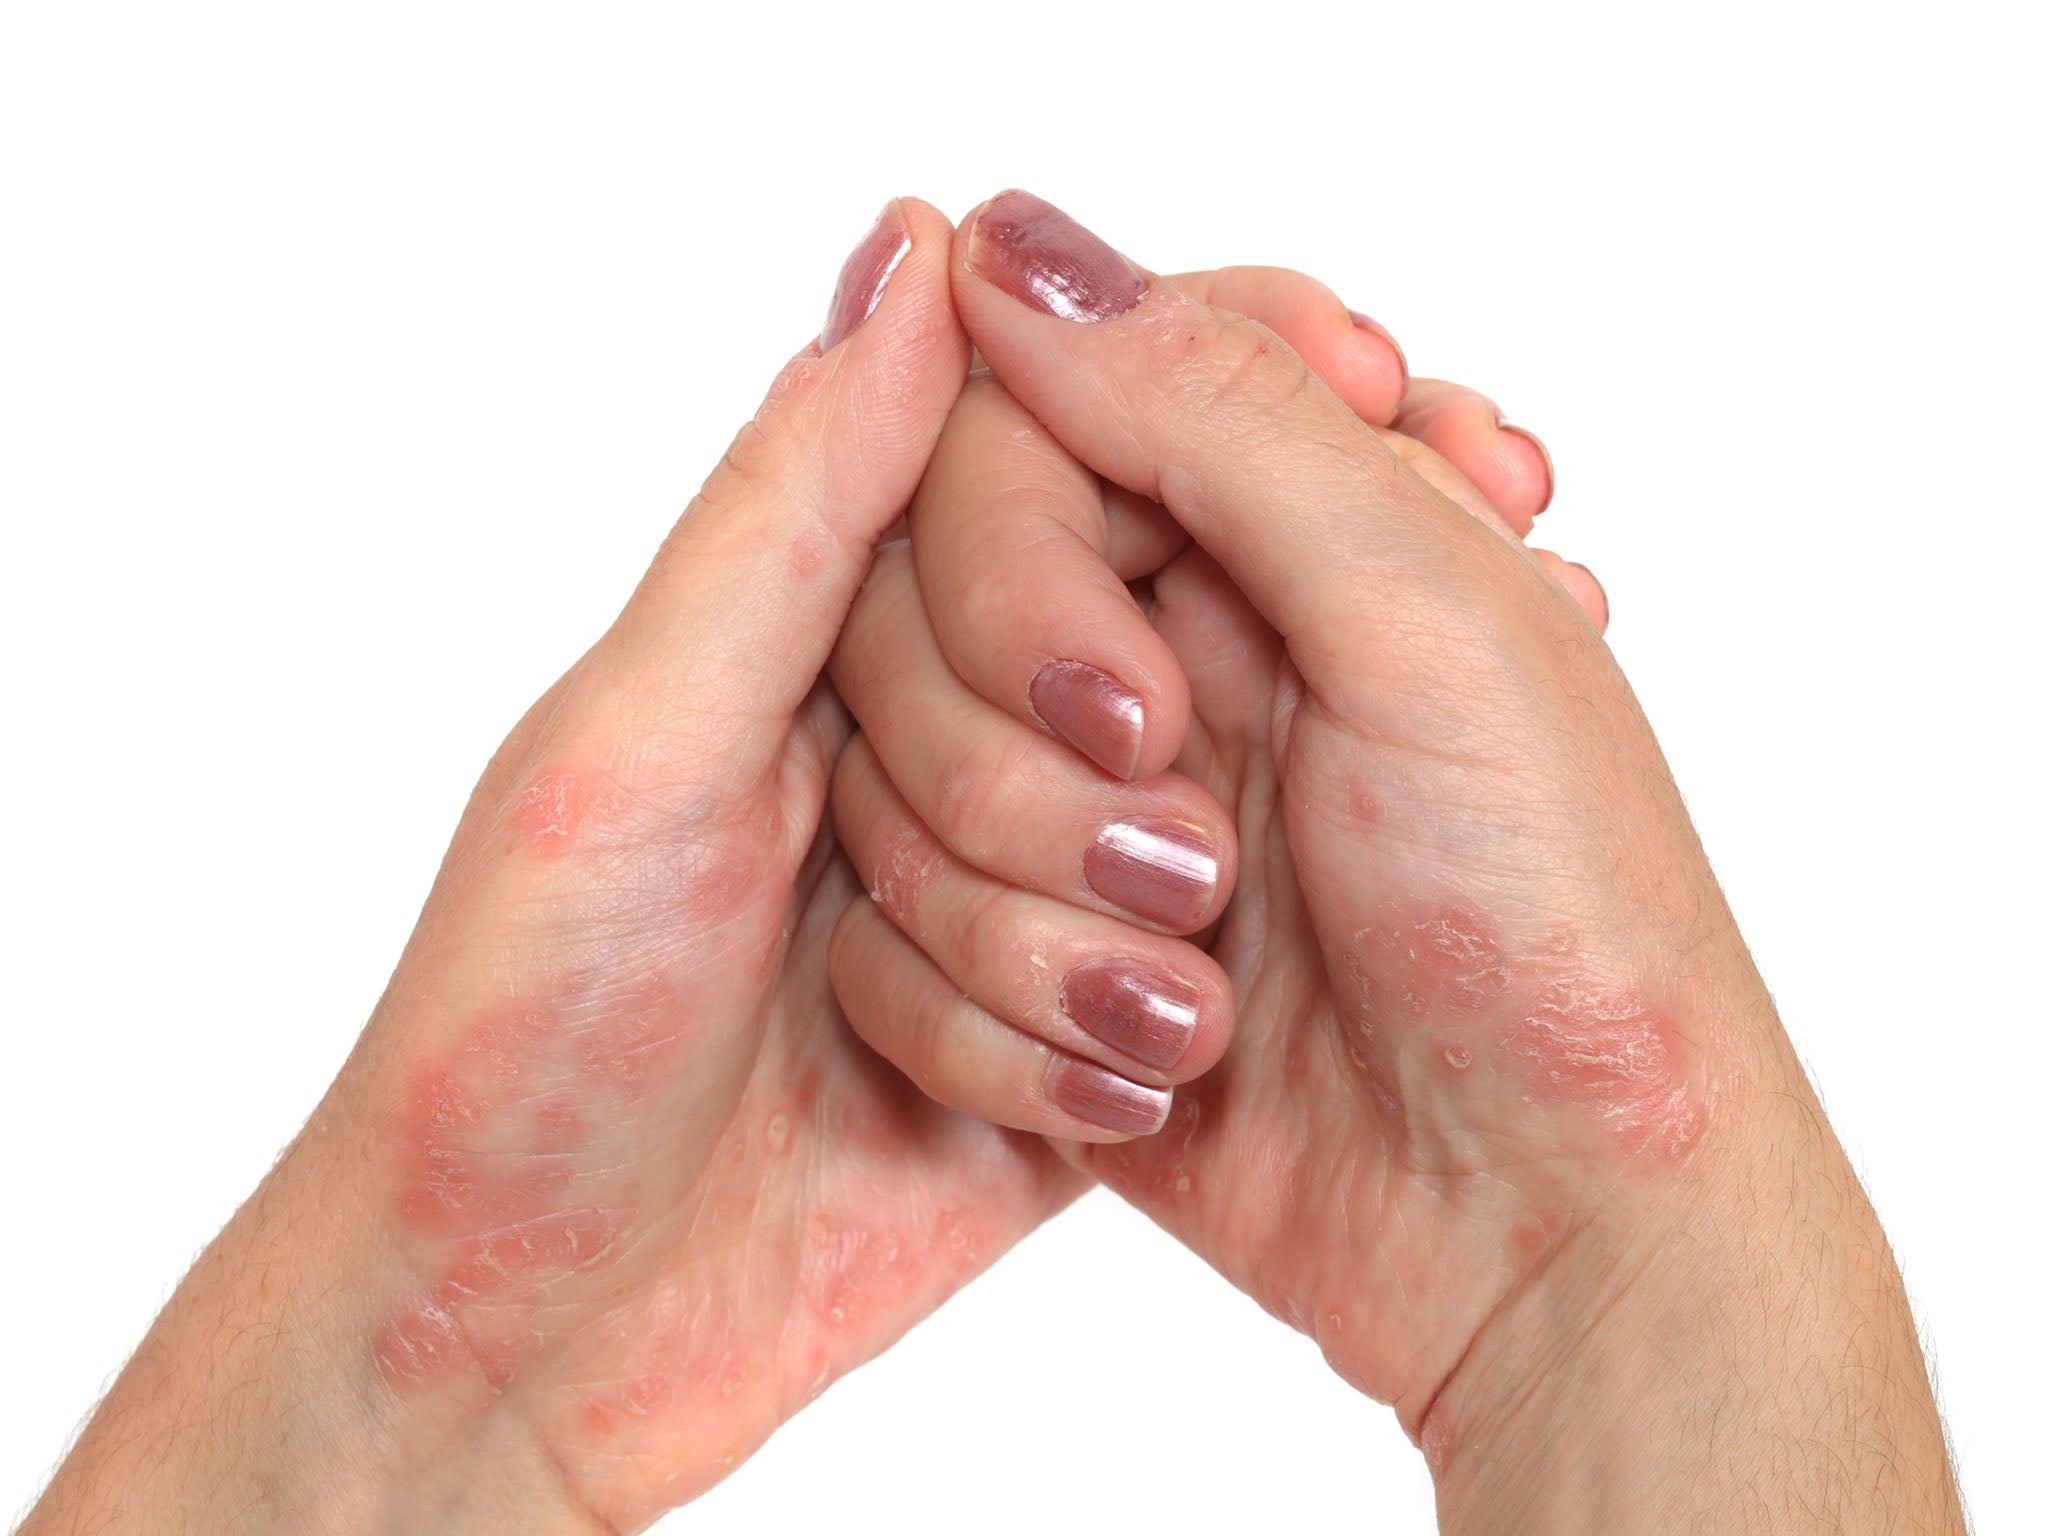 Skin conditions like eczema and psoriasis cause food allergies to occur through touch